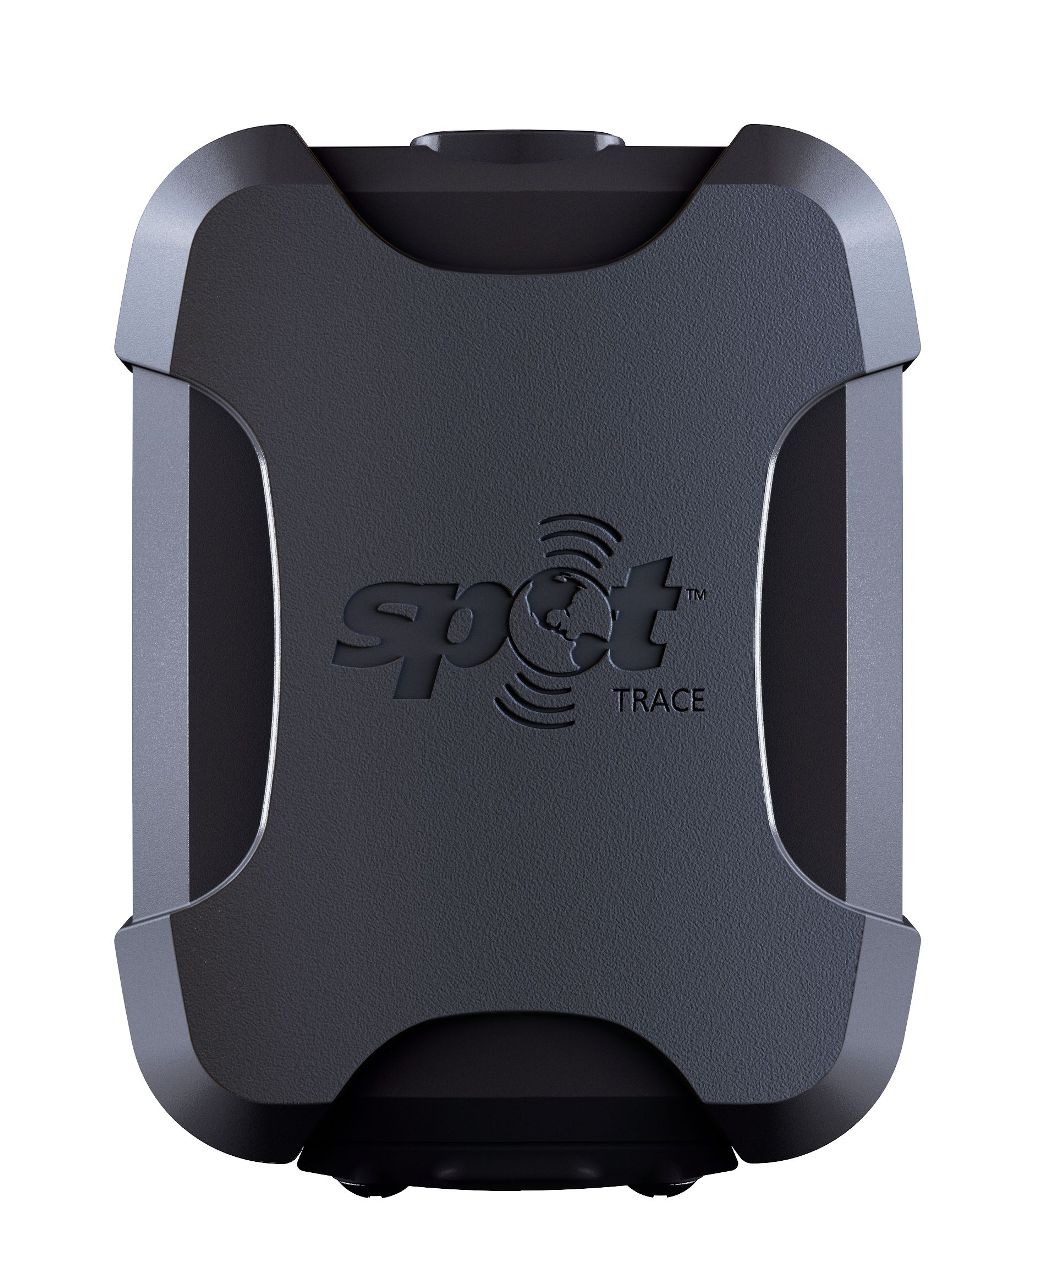 Compact rugged SPOT Trace from Globalstar